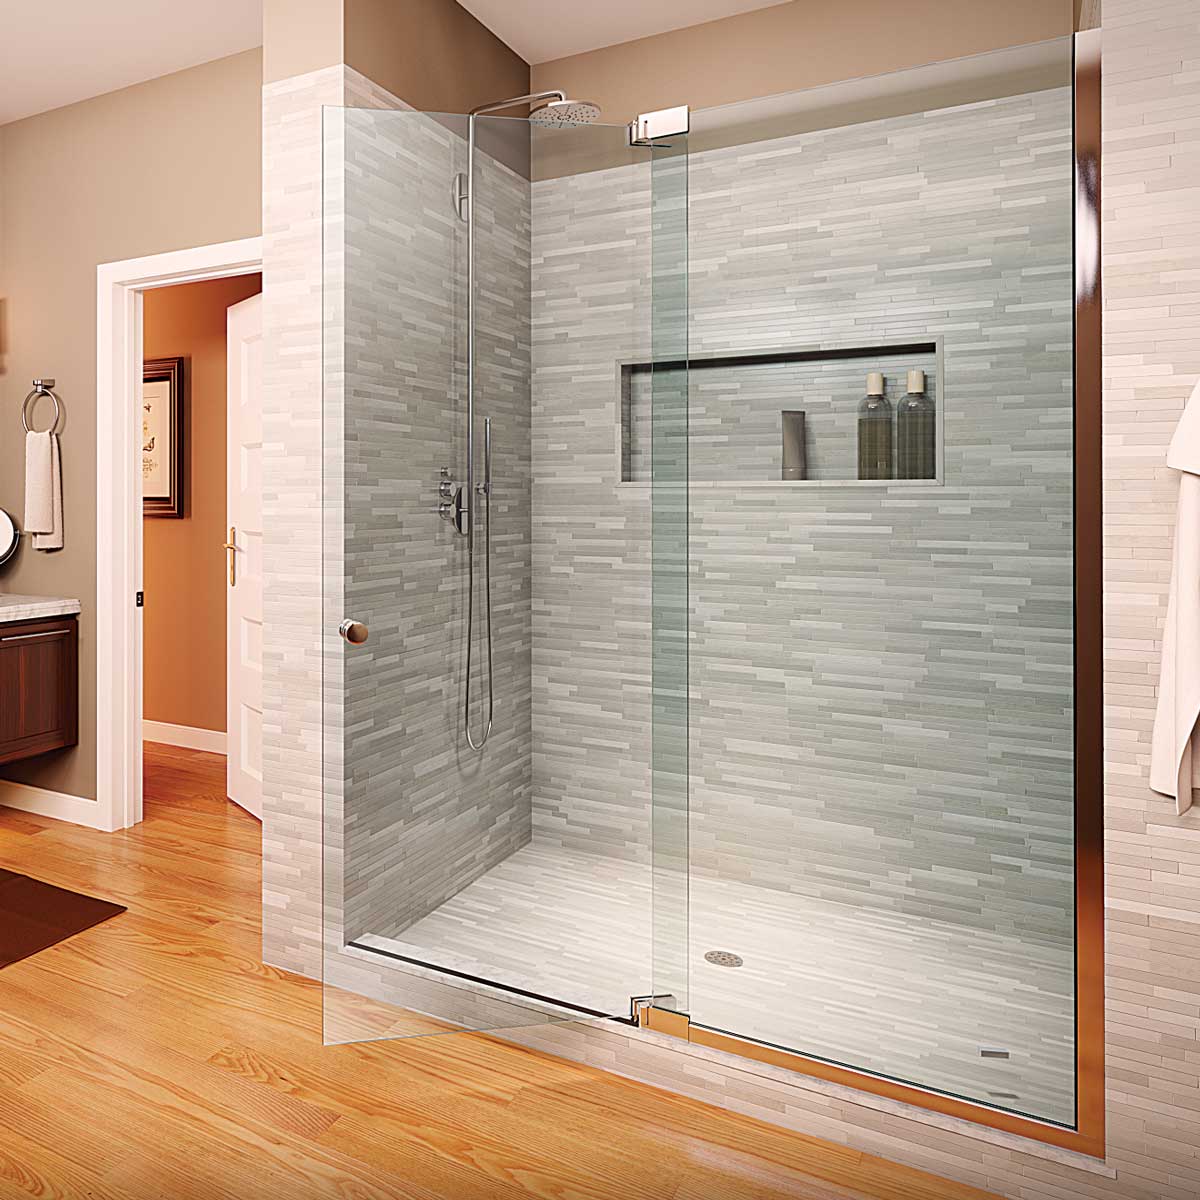 “Custom” in popular sizes. Roda, a Basco product line, offers several frameless door-and-panel configurations and glass heights as well as custom width panels. Depending on panel length and configuration, relatively unobtrusive angle brackets can add support. The Cantour model starts at $1115.